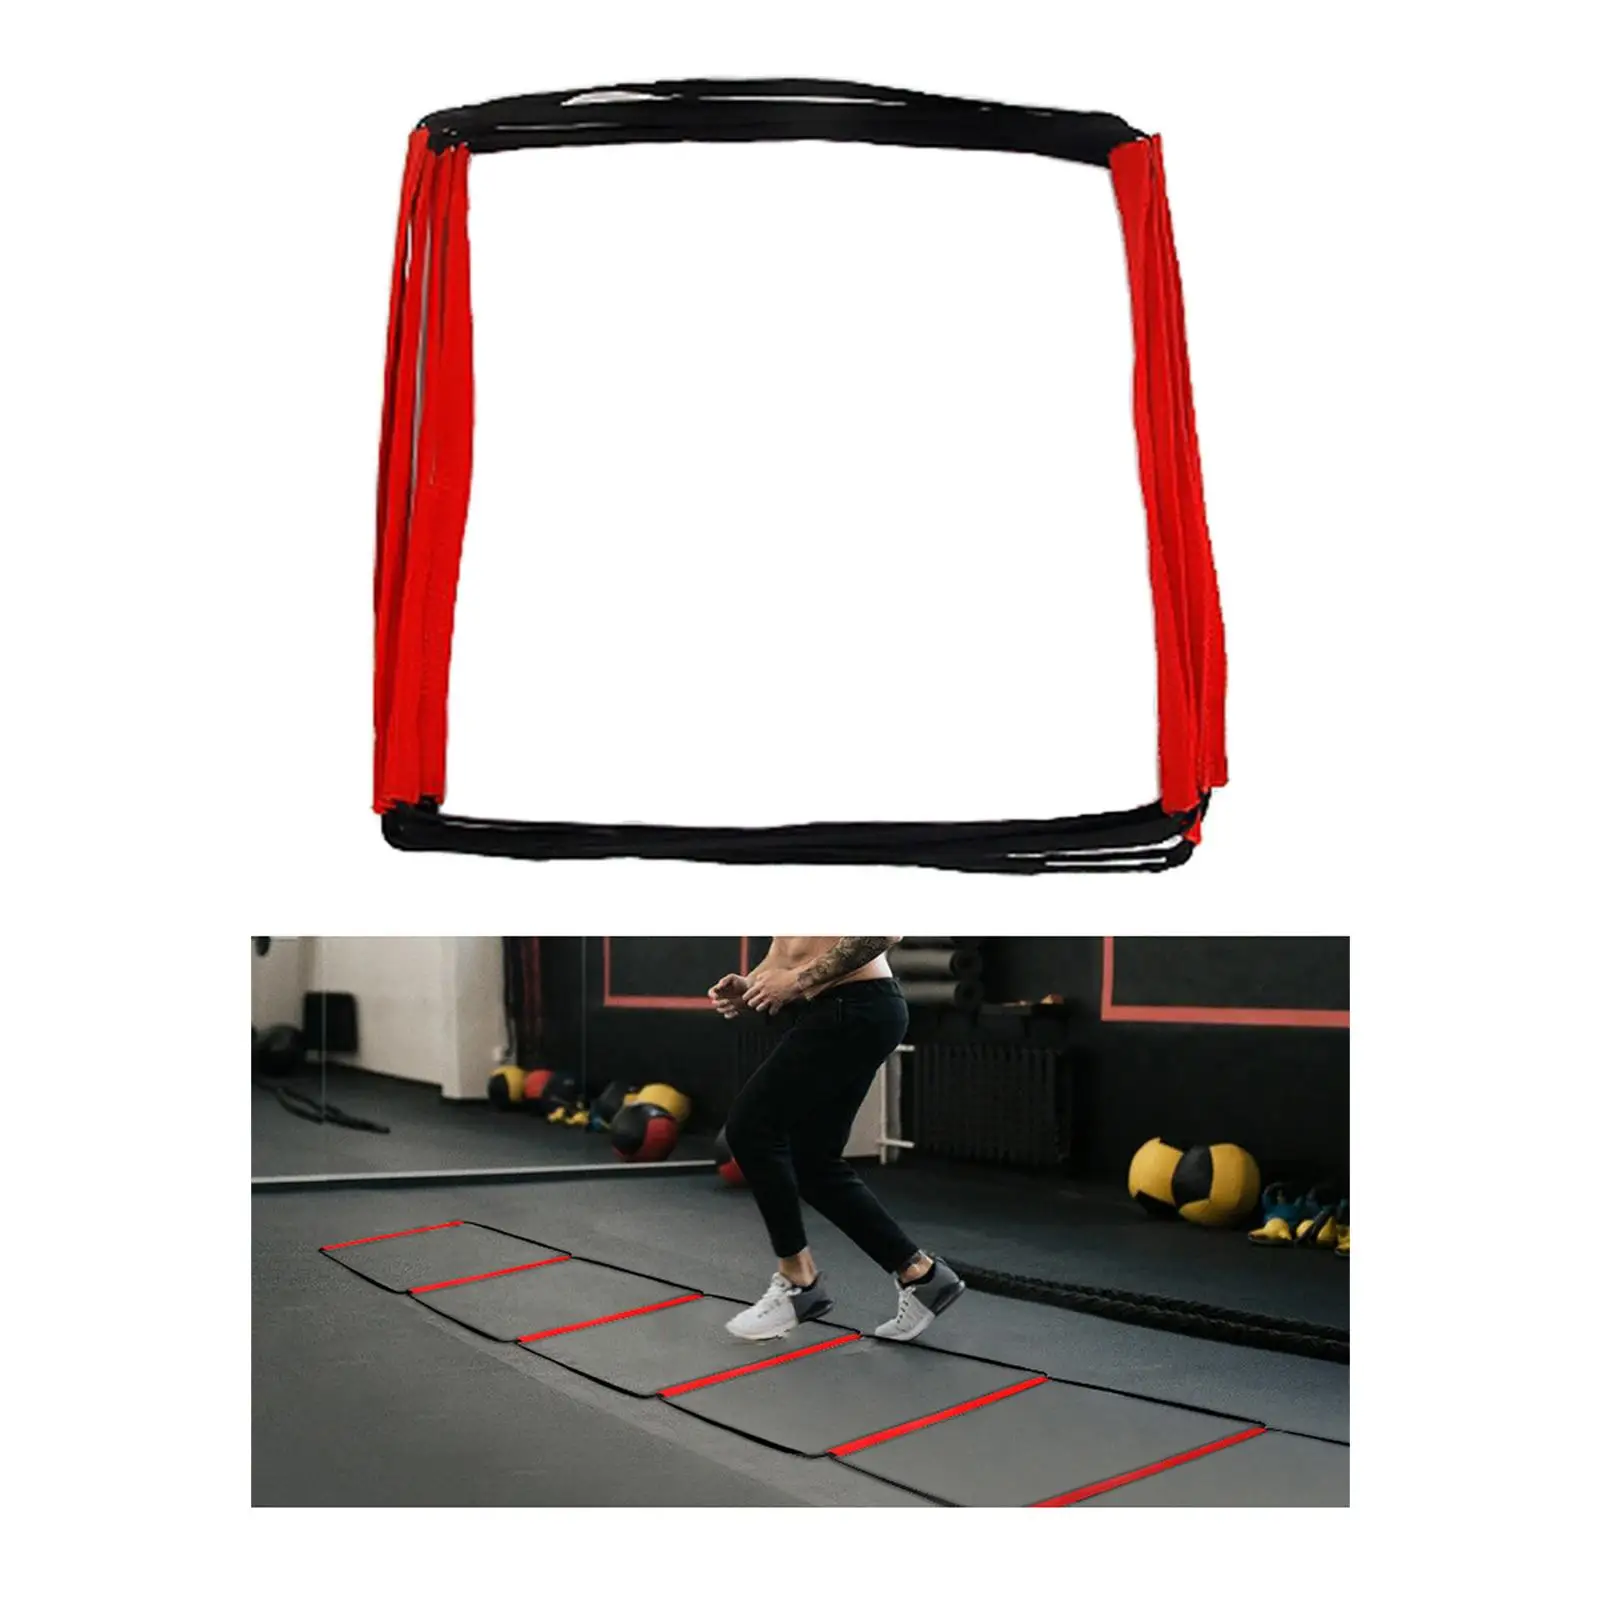 Agility Training Ladder Jumping Hurdles Stairs Flexible for Basketball Athletes Rugby